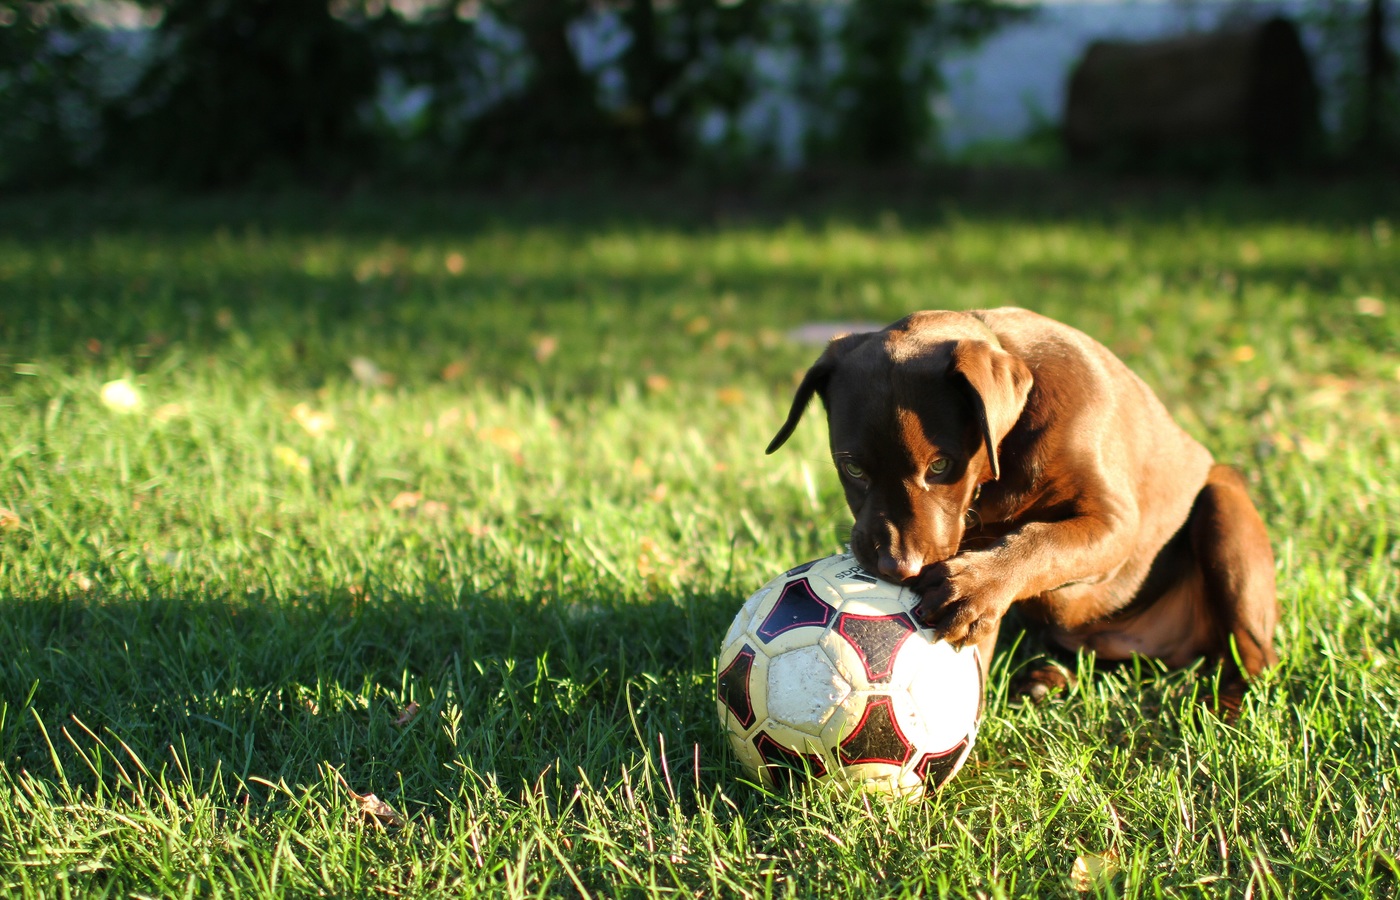 A puppy plays with a soccer ball on a lawn